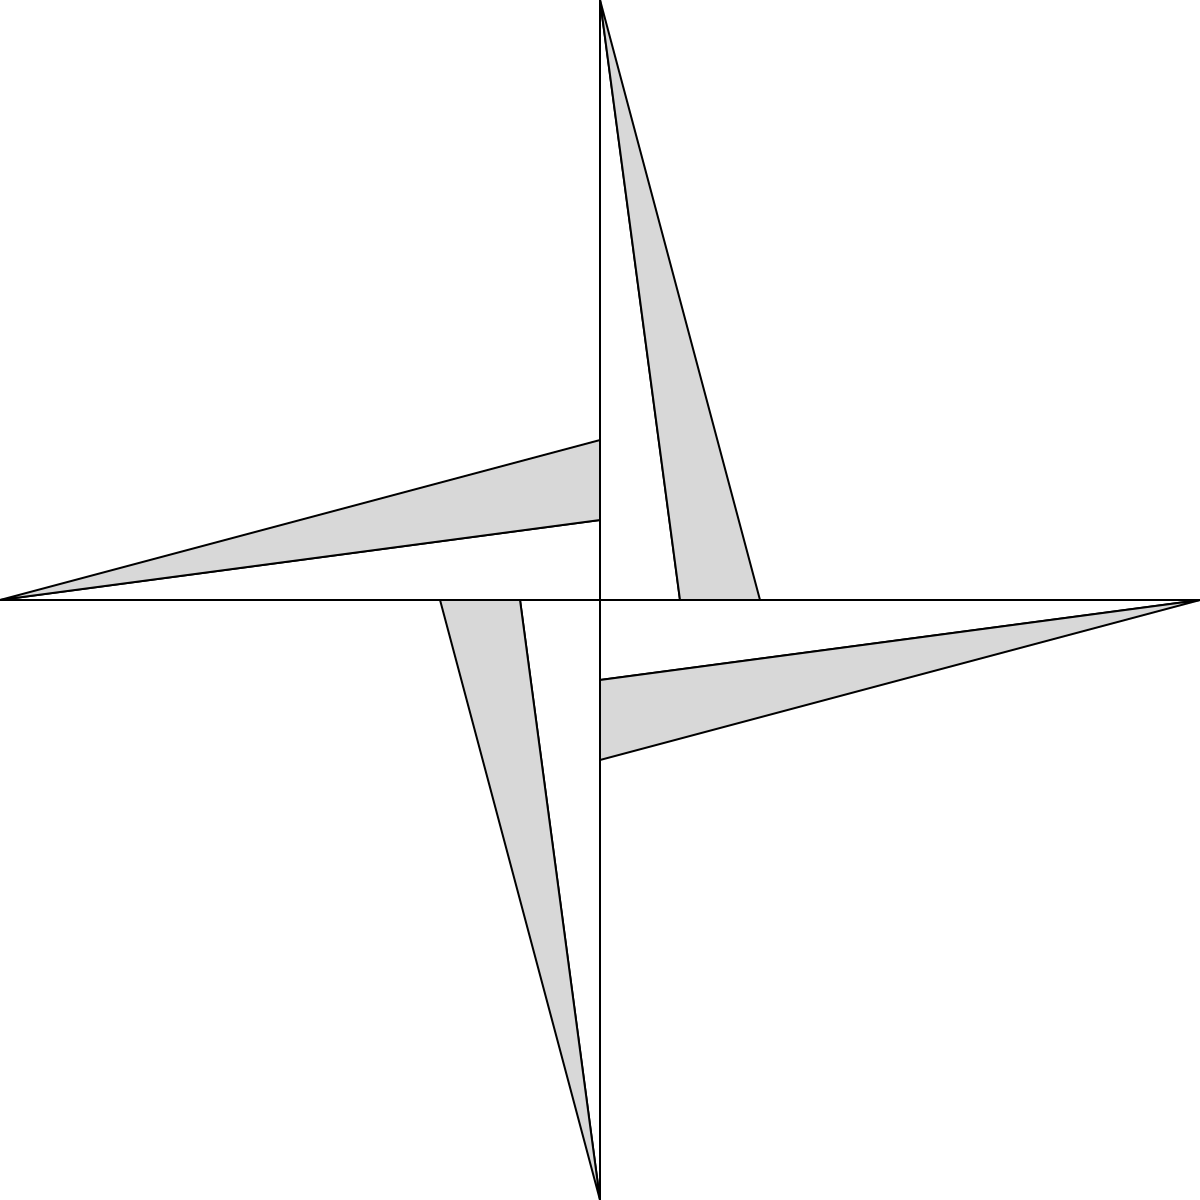 Compass Logo in Grayscale